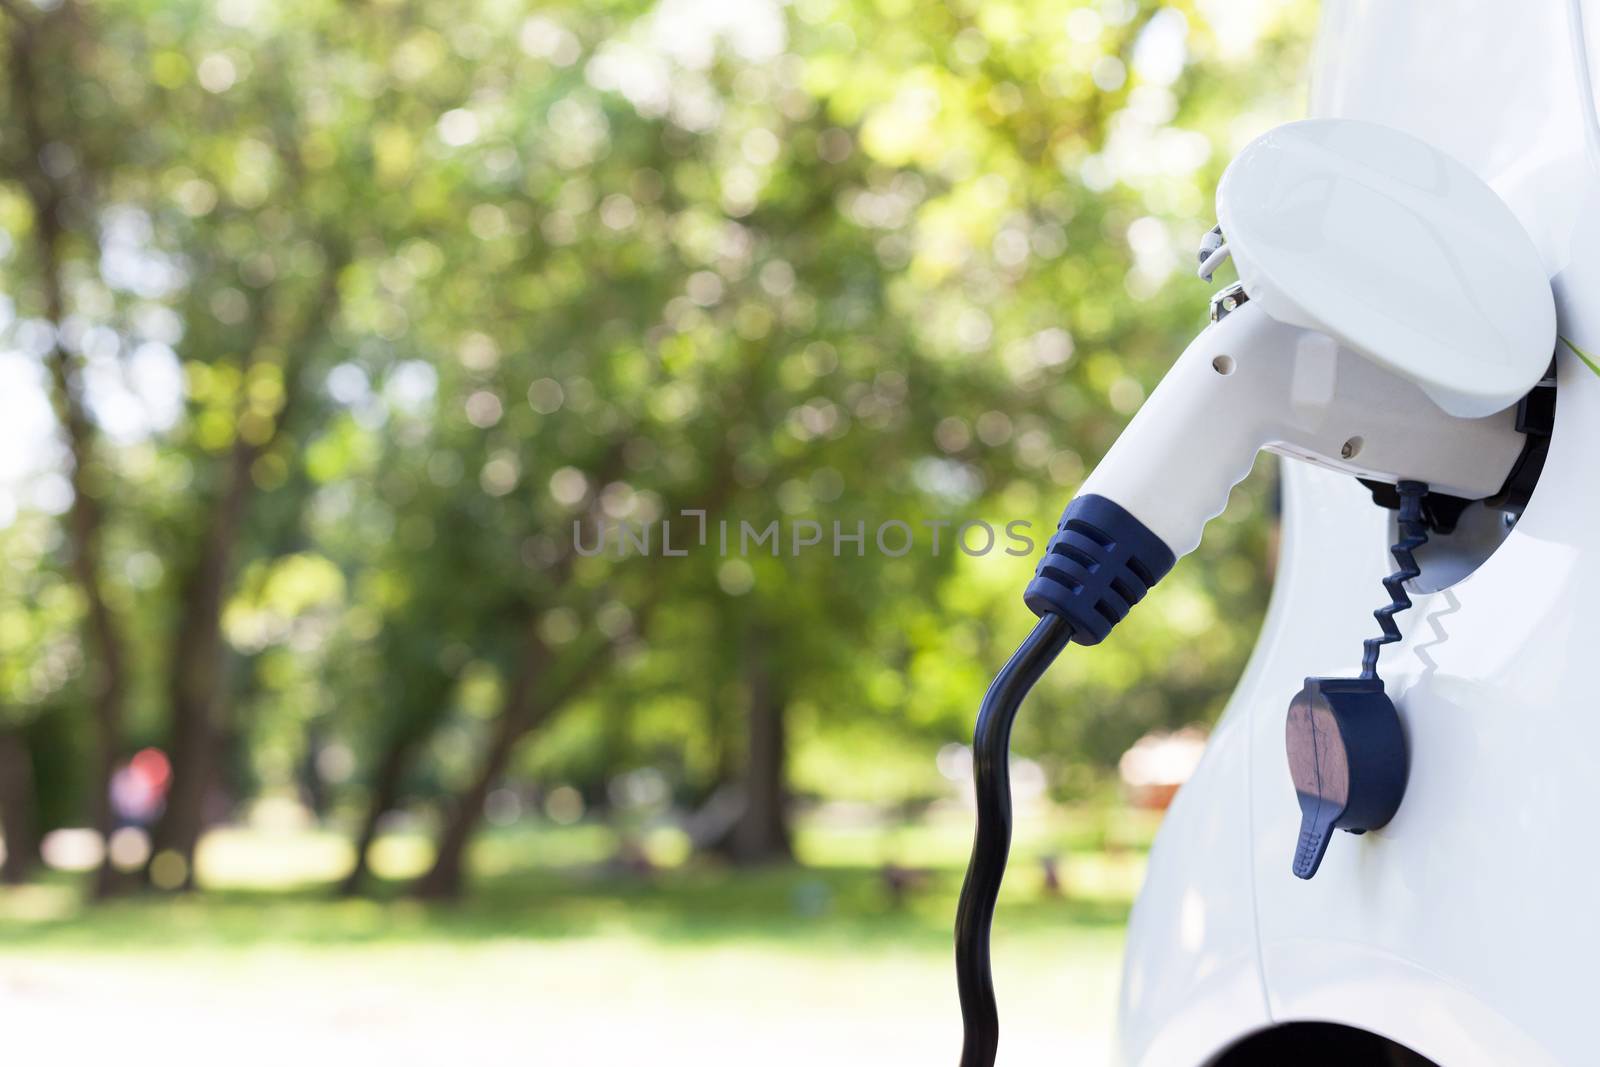 Charging battery of an electric car by wellphoto